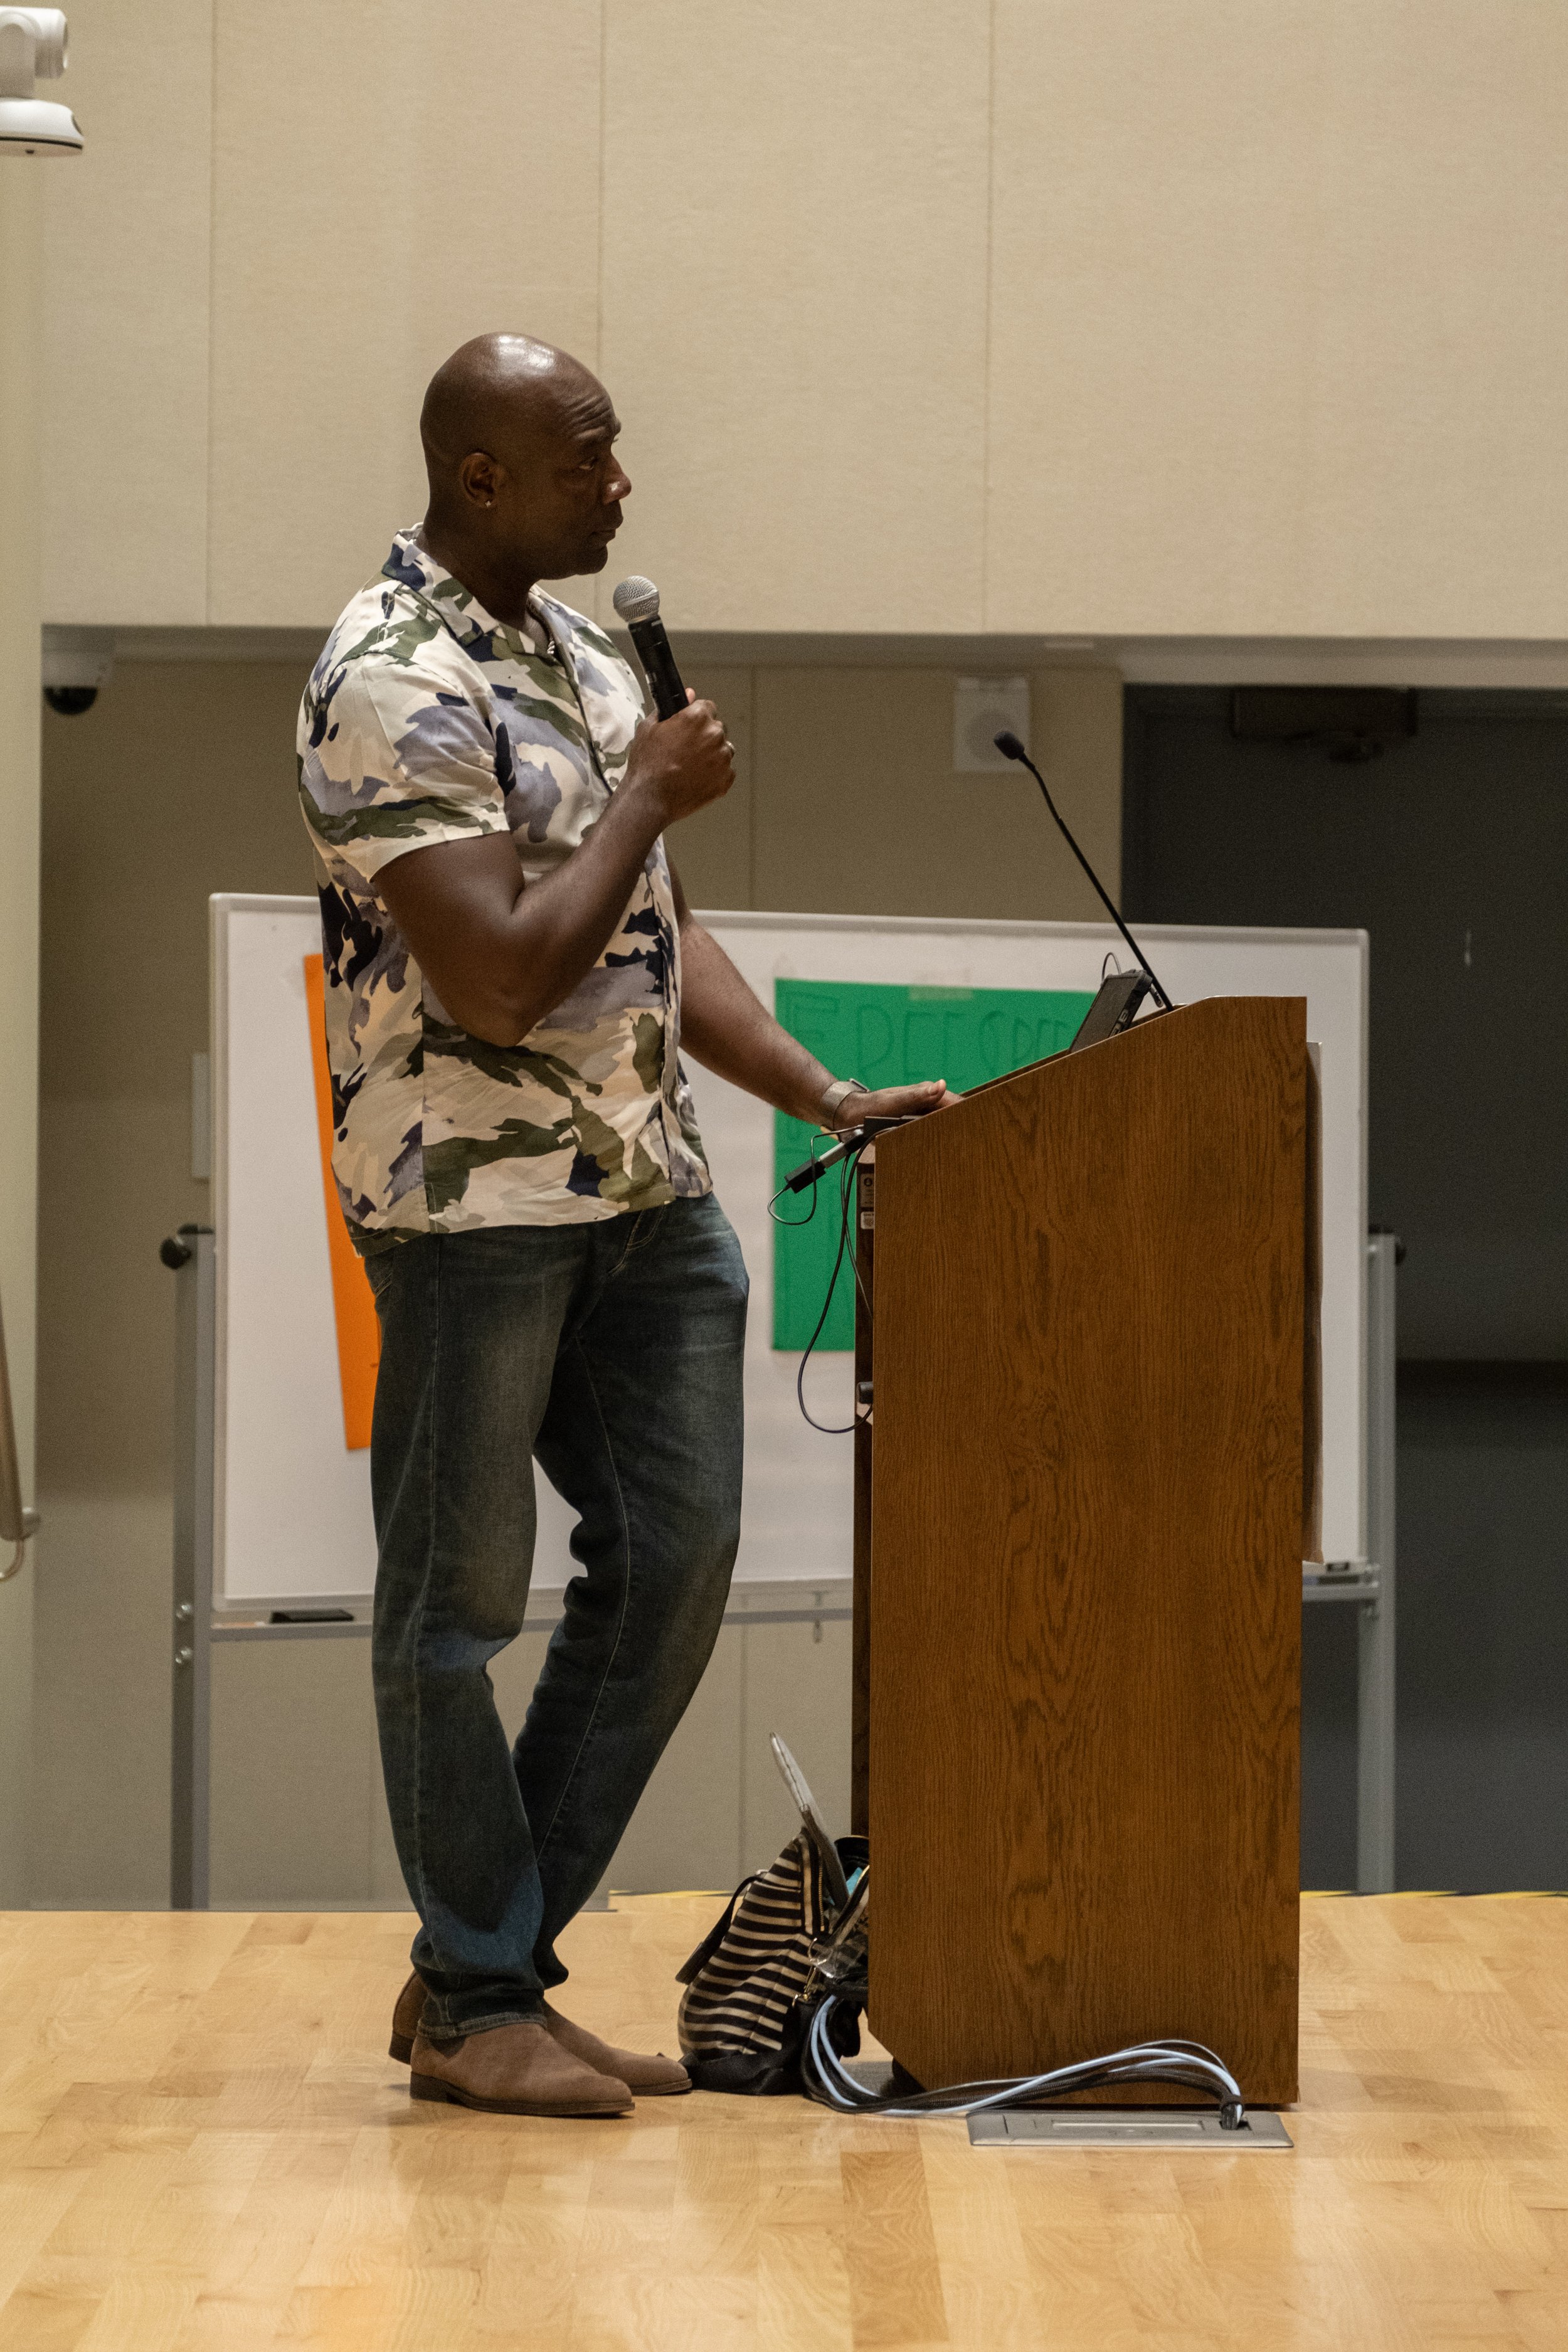  Dr. Jermaine Junius, president of the Pan African Alliance, address the audience at the community gathering in lieu of a protest against the play "By The River Rivanna" in the Student Services Orientation Hall on the main campus at Santa Monica Coll